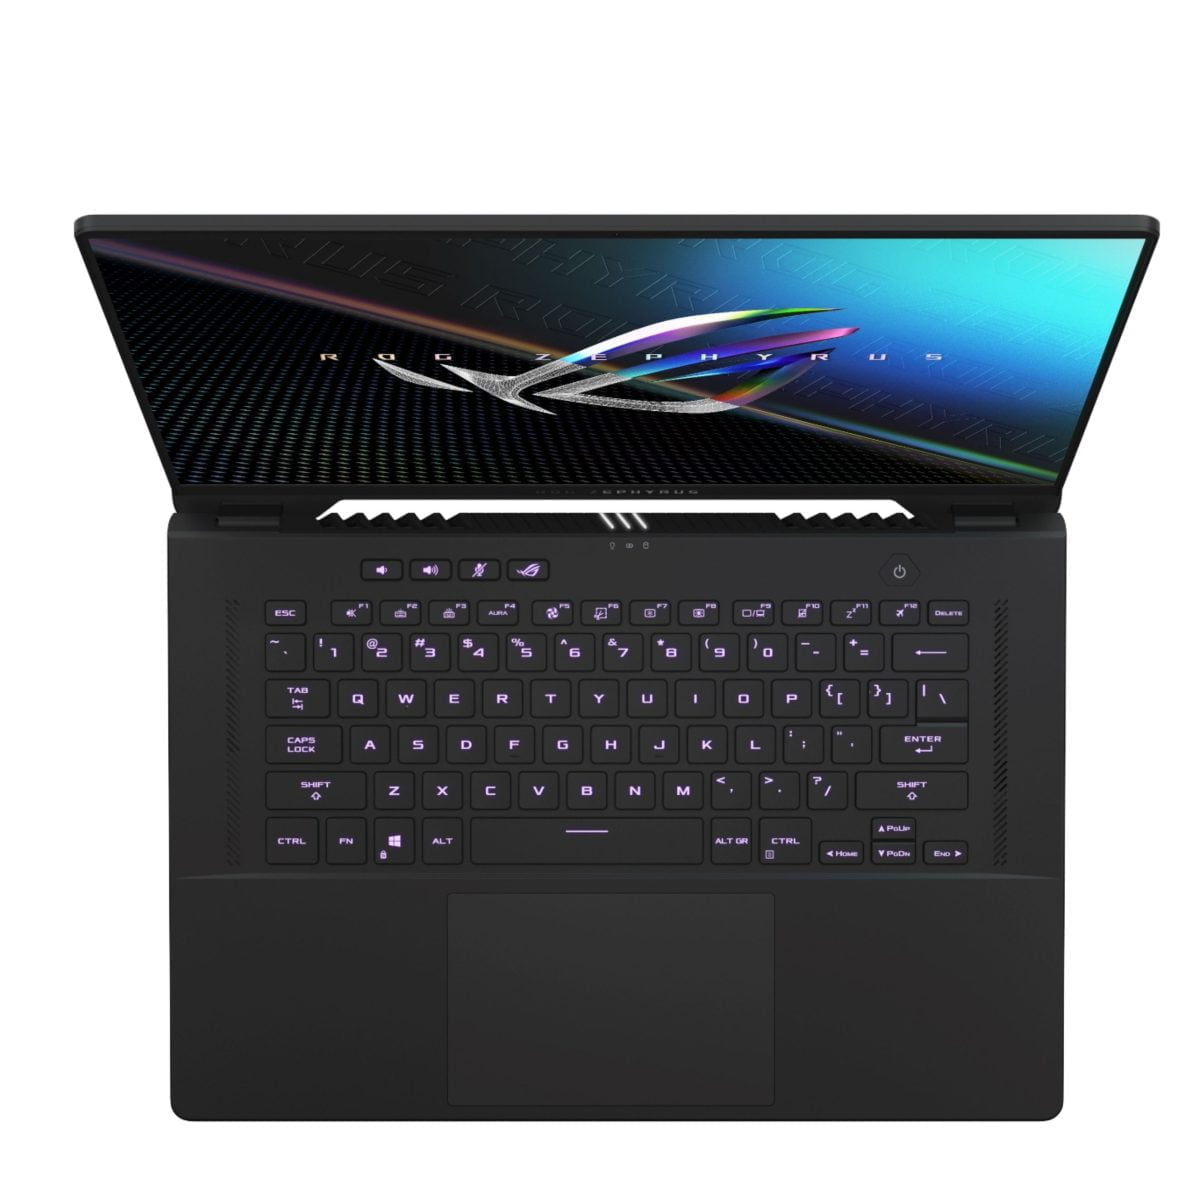 6464203Cv3D Scaled Asus &Lt;H1 Class=&Quot;Heading-5 V-Fw-Regular&Quot;&Gt;Asus - Rog 16&Quot; Wuxga 144Hz Gaming Laptop - Intel Core I7 - 16Gb Memory - Nvidia Rtx3050Ti - 512Gb Ssd&Lt;/H1&Gt; Asus Rog Gaming Laptop. Enjoy Everyday Gaming With This Asus Notebook Pc. The 11Th Gen Intel Core I7 Processor And 16Gb Of Ram Let You Run Graphics-Heavy Games Smoothly, While The Potent Nvidia Rtx3050Ti Graphics Produce High-Quality Visuals On The New Fast 16-Inch 144Hz Wuxga Display. This Asus Notebook Pc Has 512Gb Ssd That Shortens Load Times And Offers Ample Storage. Asus Rog Gaming Laptop Asus - Rog 16&Quot; Wuxga 144Hz Gaming Laptop - Intel Core I7 - 16Gb Memory - Nvidia Rtx3050Ti - 512Gb Ssd